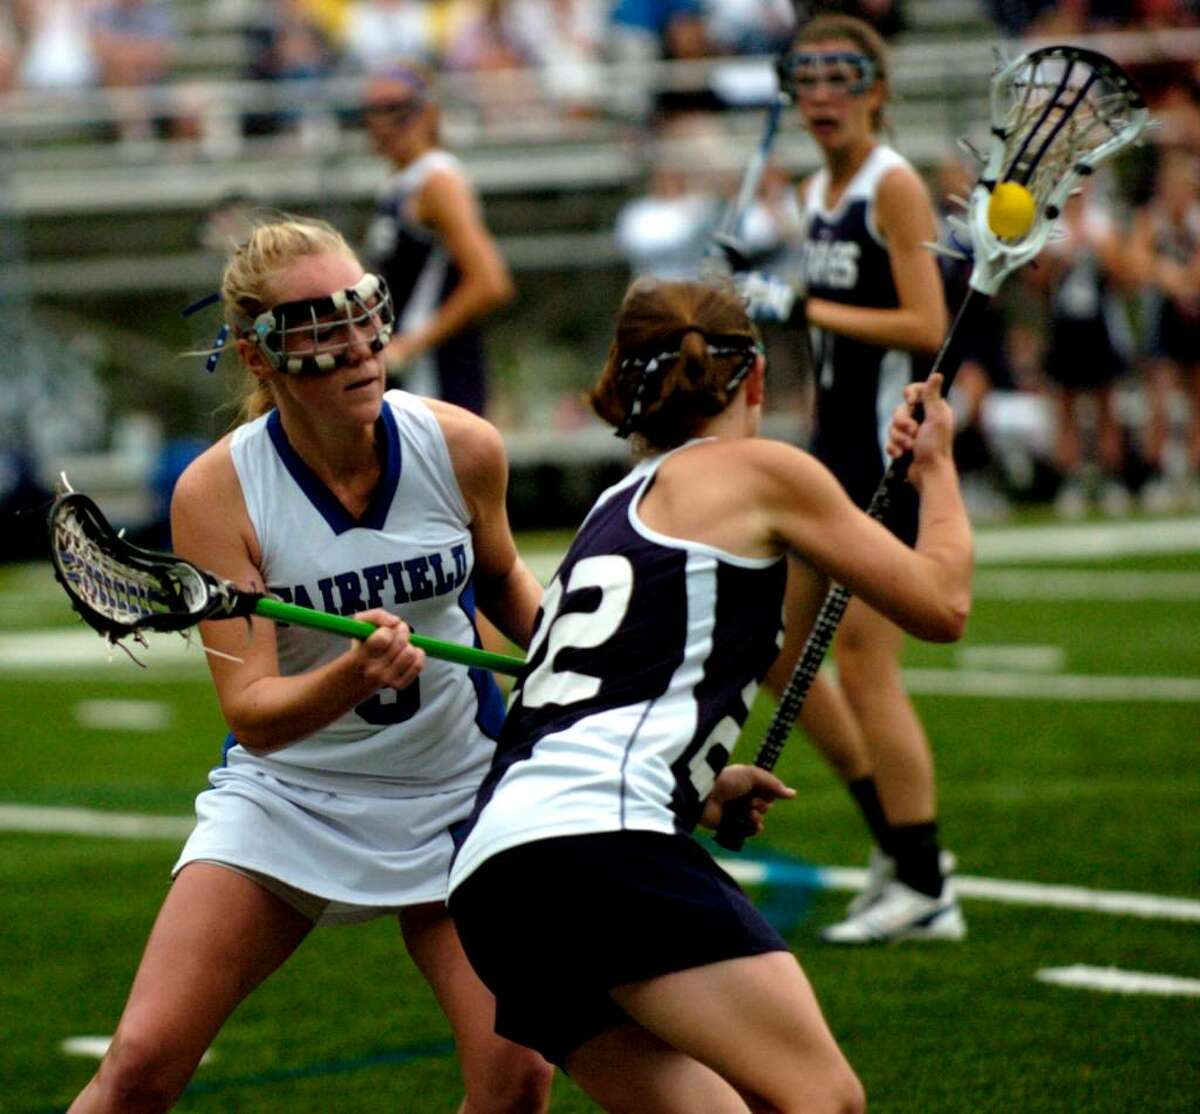 Fairfield Ludlowe High School and Staples High School compete in the girls lacrosse Division II final game at Bunnell High School Saturday, June 12, 2010.